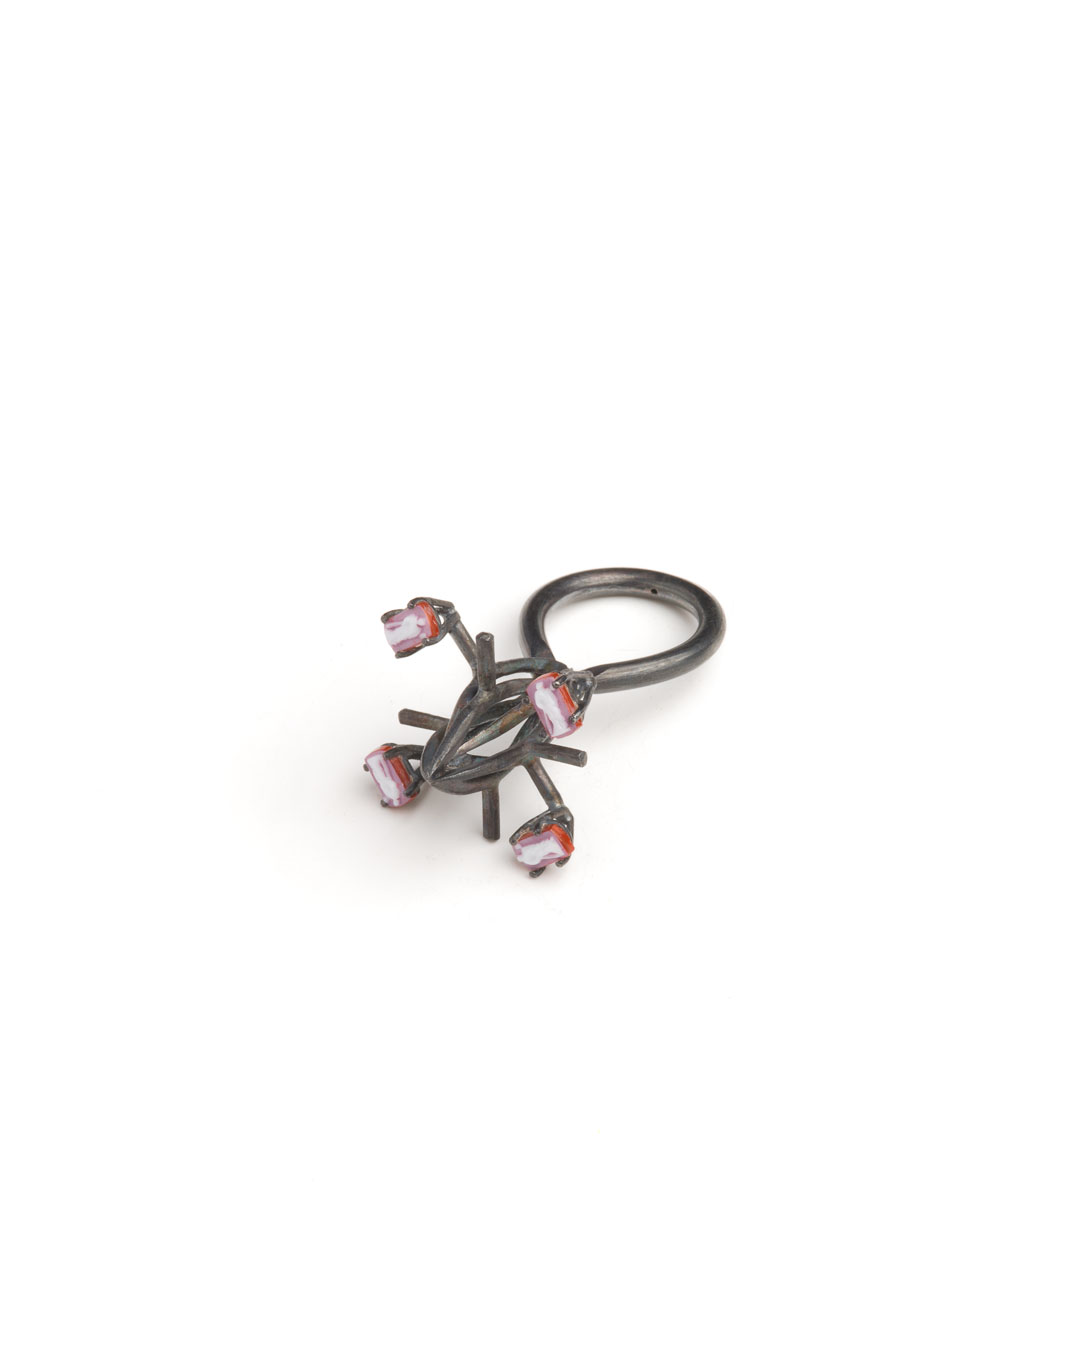 Winfried Krüger, untitled, 1997, necklace, ring; oxidised silver, stones, 150 x 150 mm, 50 x 25 mm, €1940 (image 2 of 2 - ring)